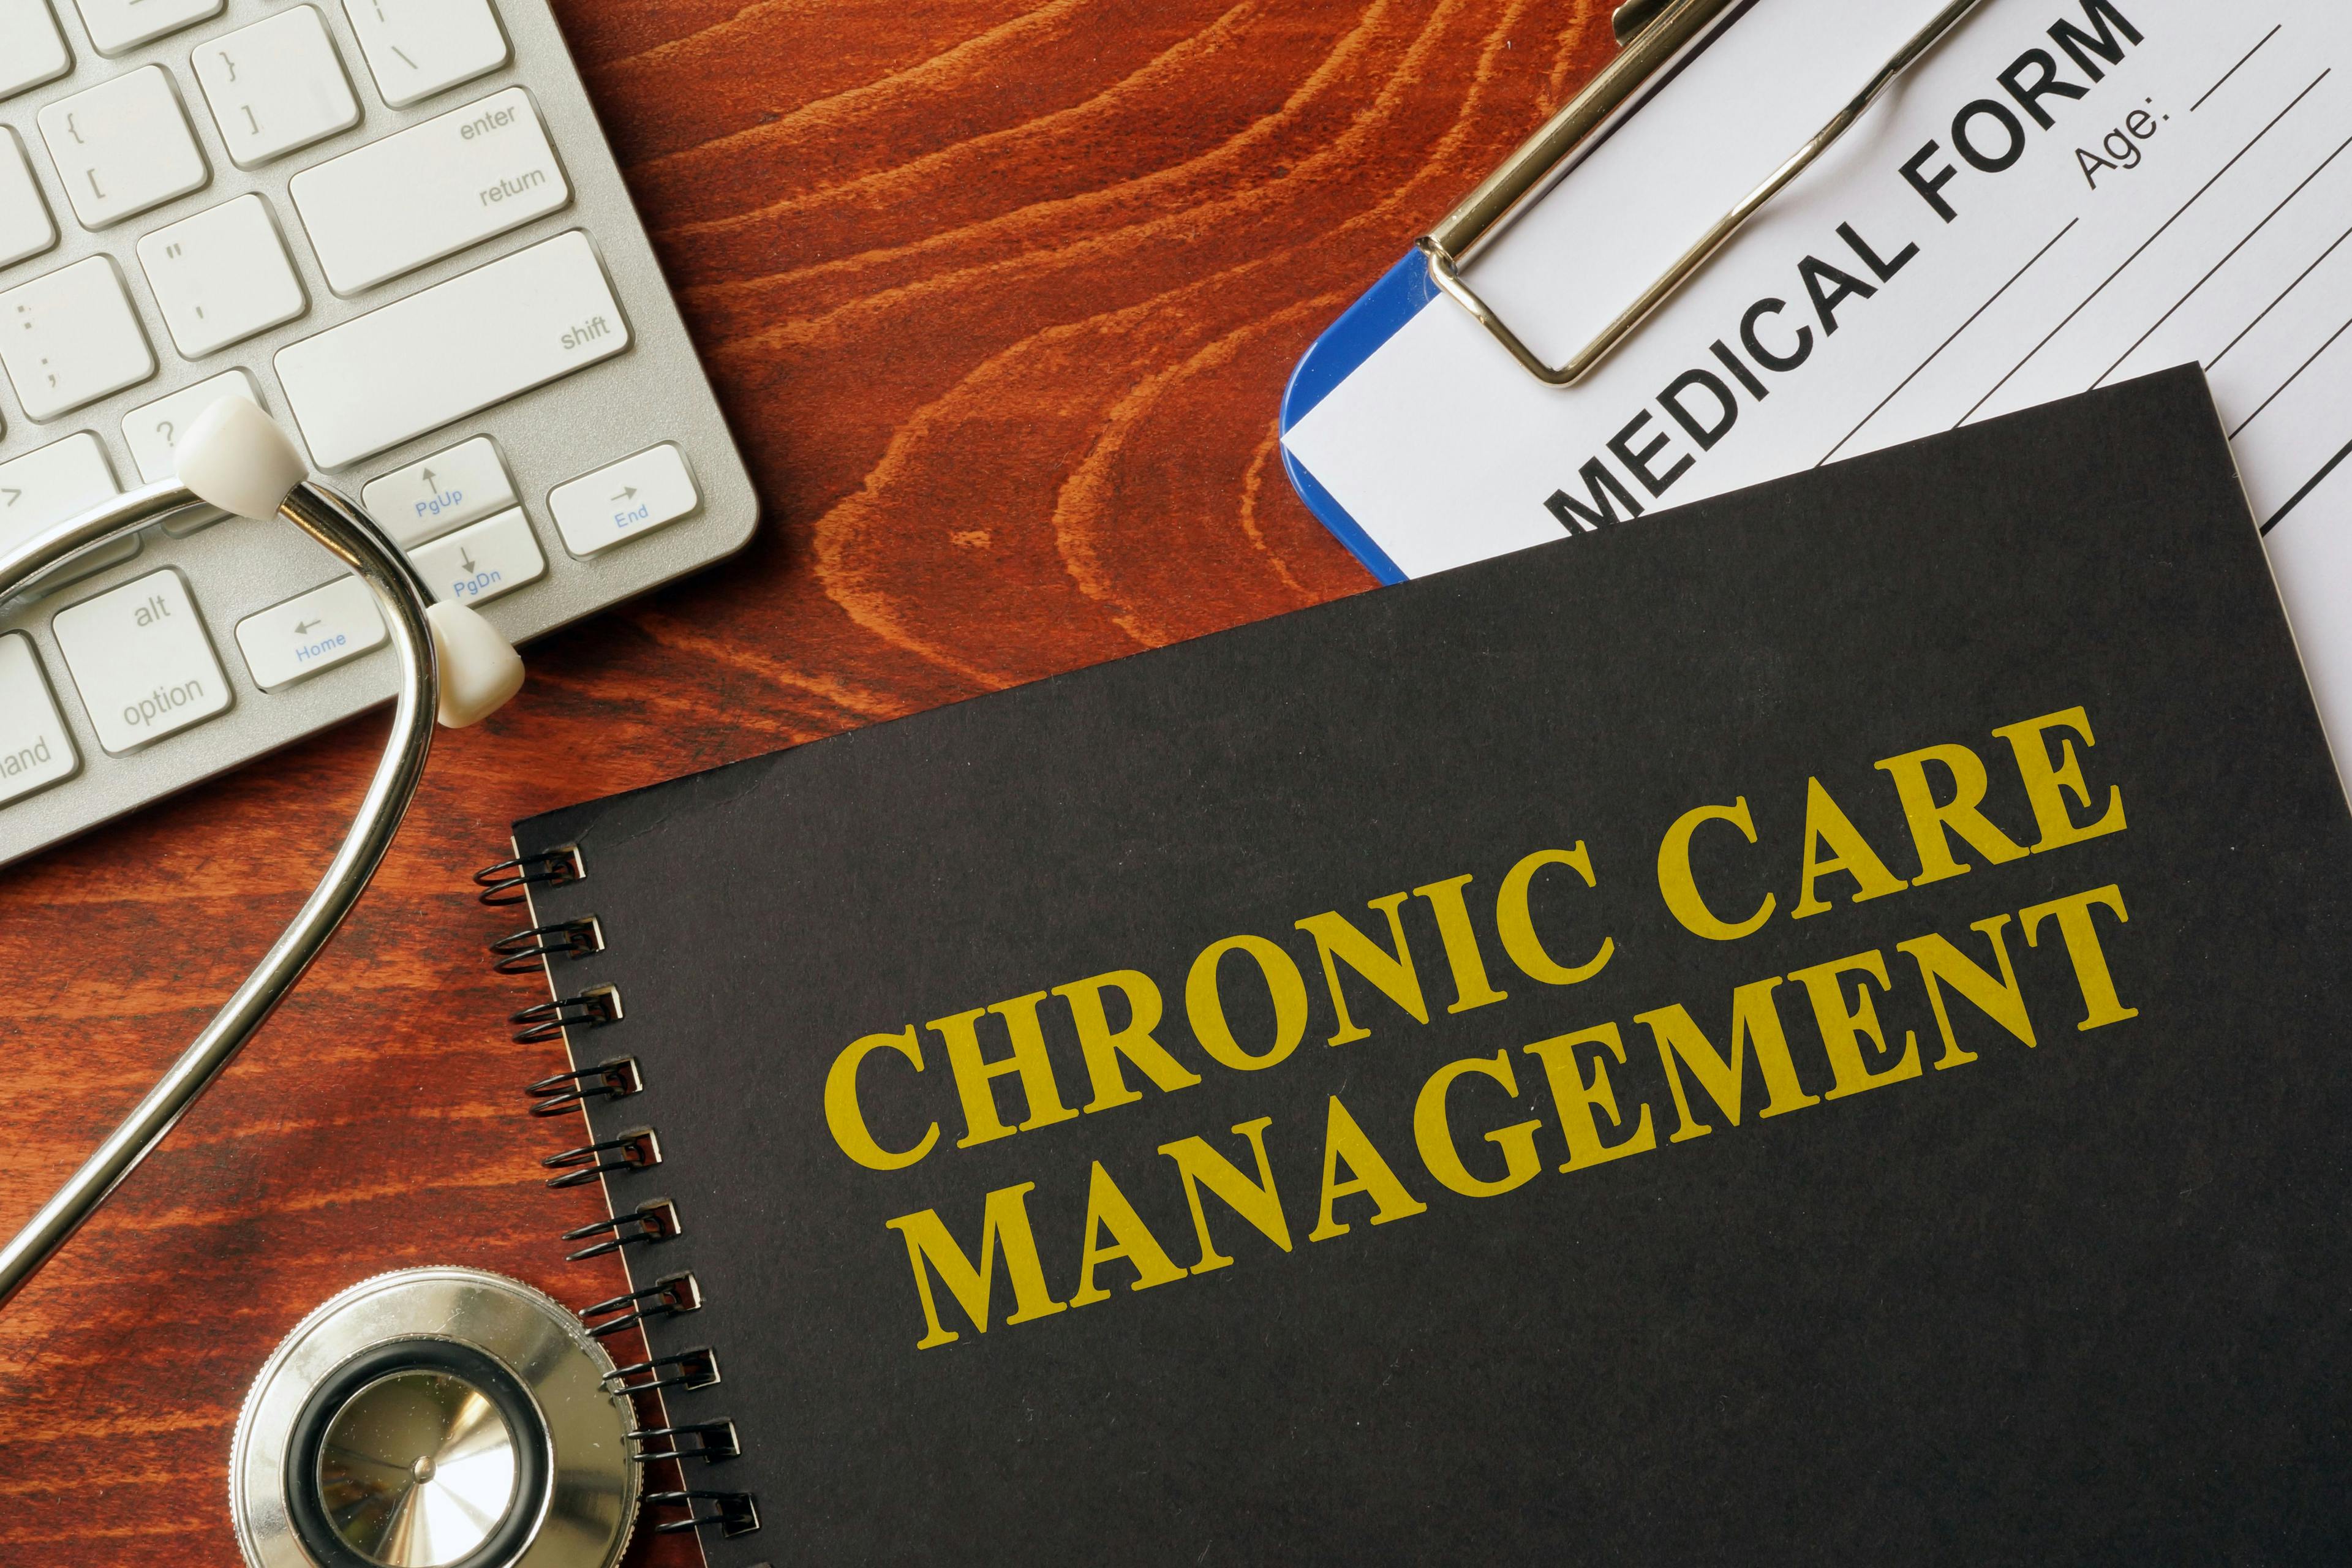 chronic care management book